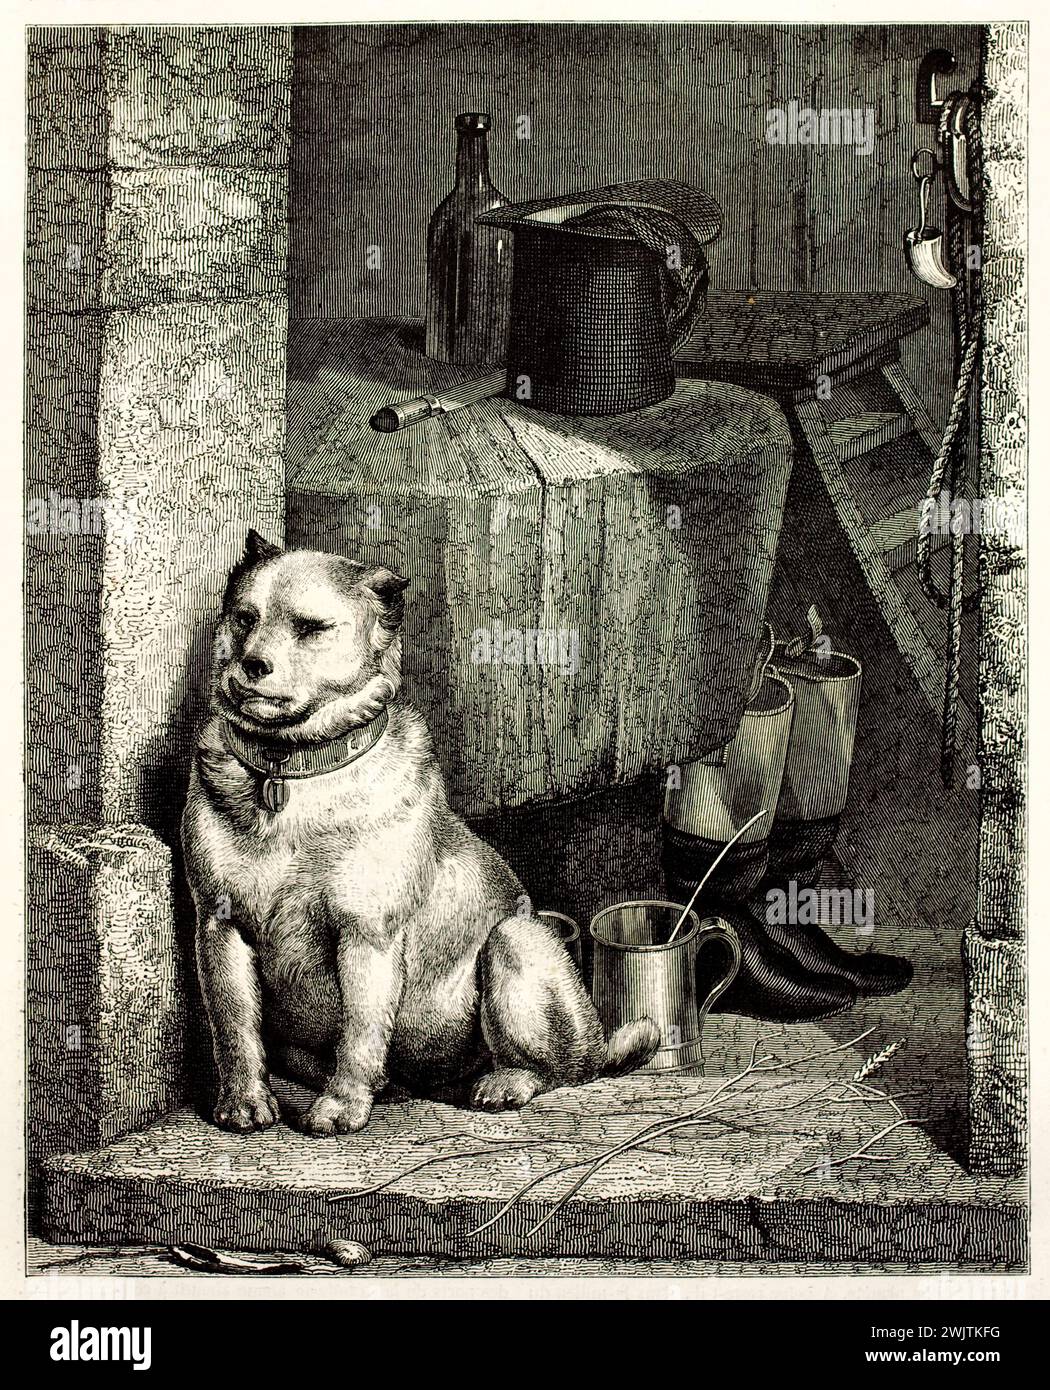 Old engraved illustration depicting (valet’s) white dog on the doorstep. Created by Freeman, published on Magasin Pittoresque, Paris, 1852 Stock Photo